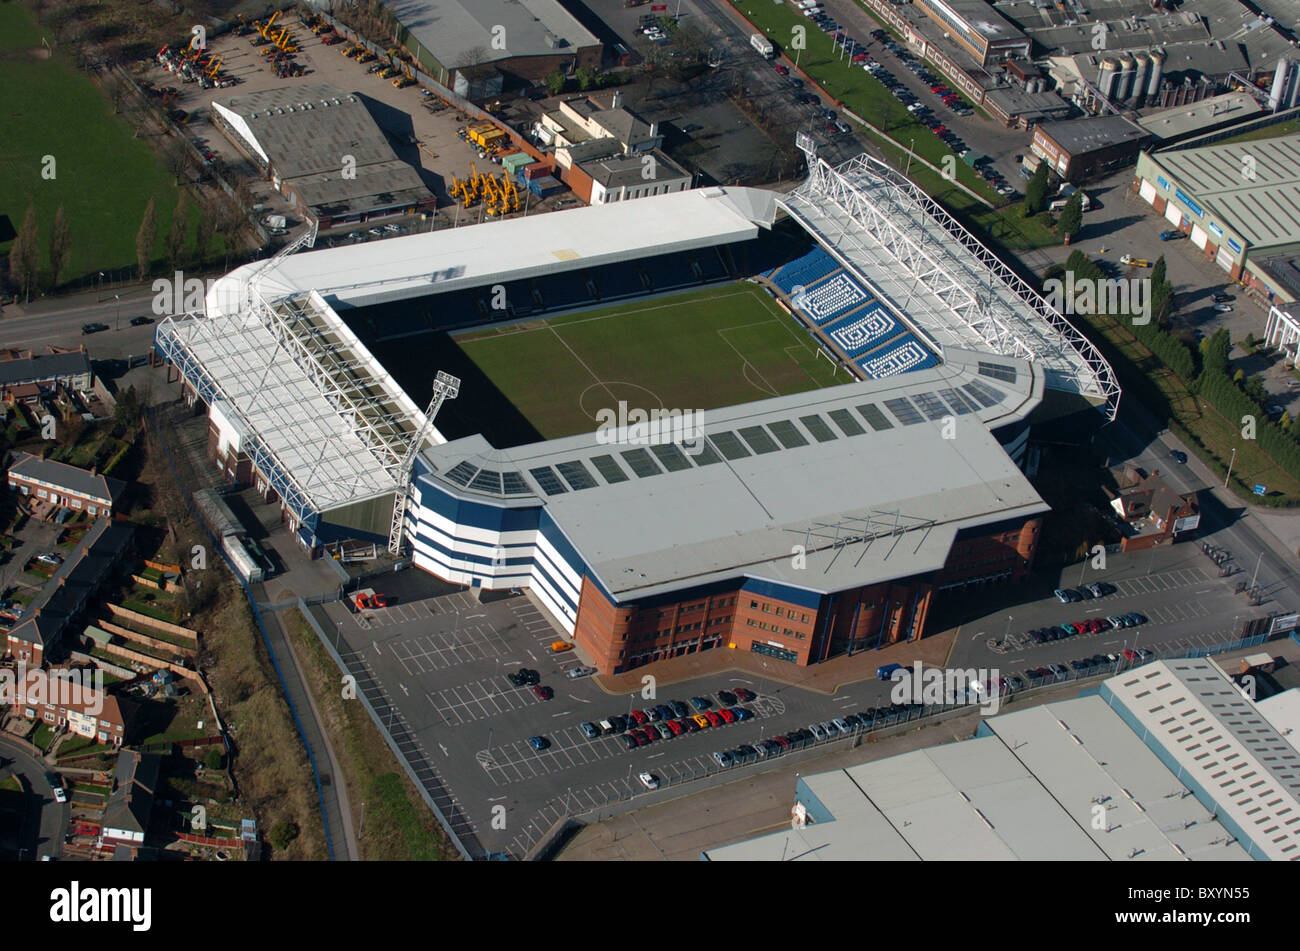 West Bromwich Albion Football Club - The Hawthorns - Stadium in